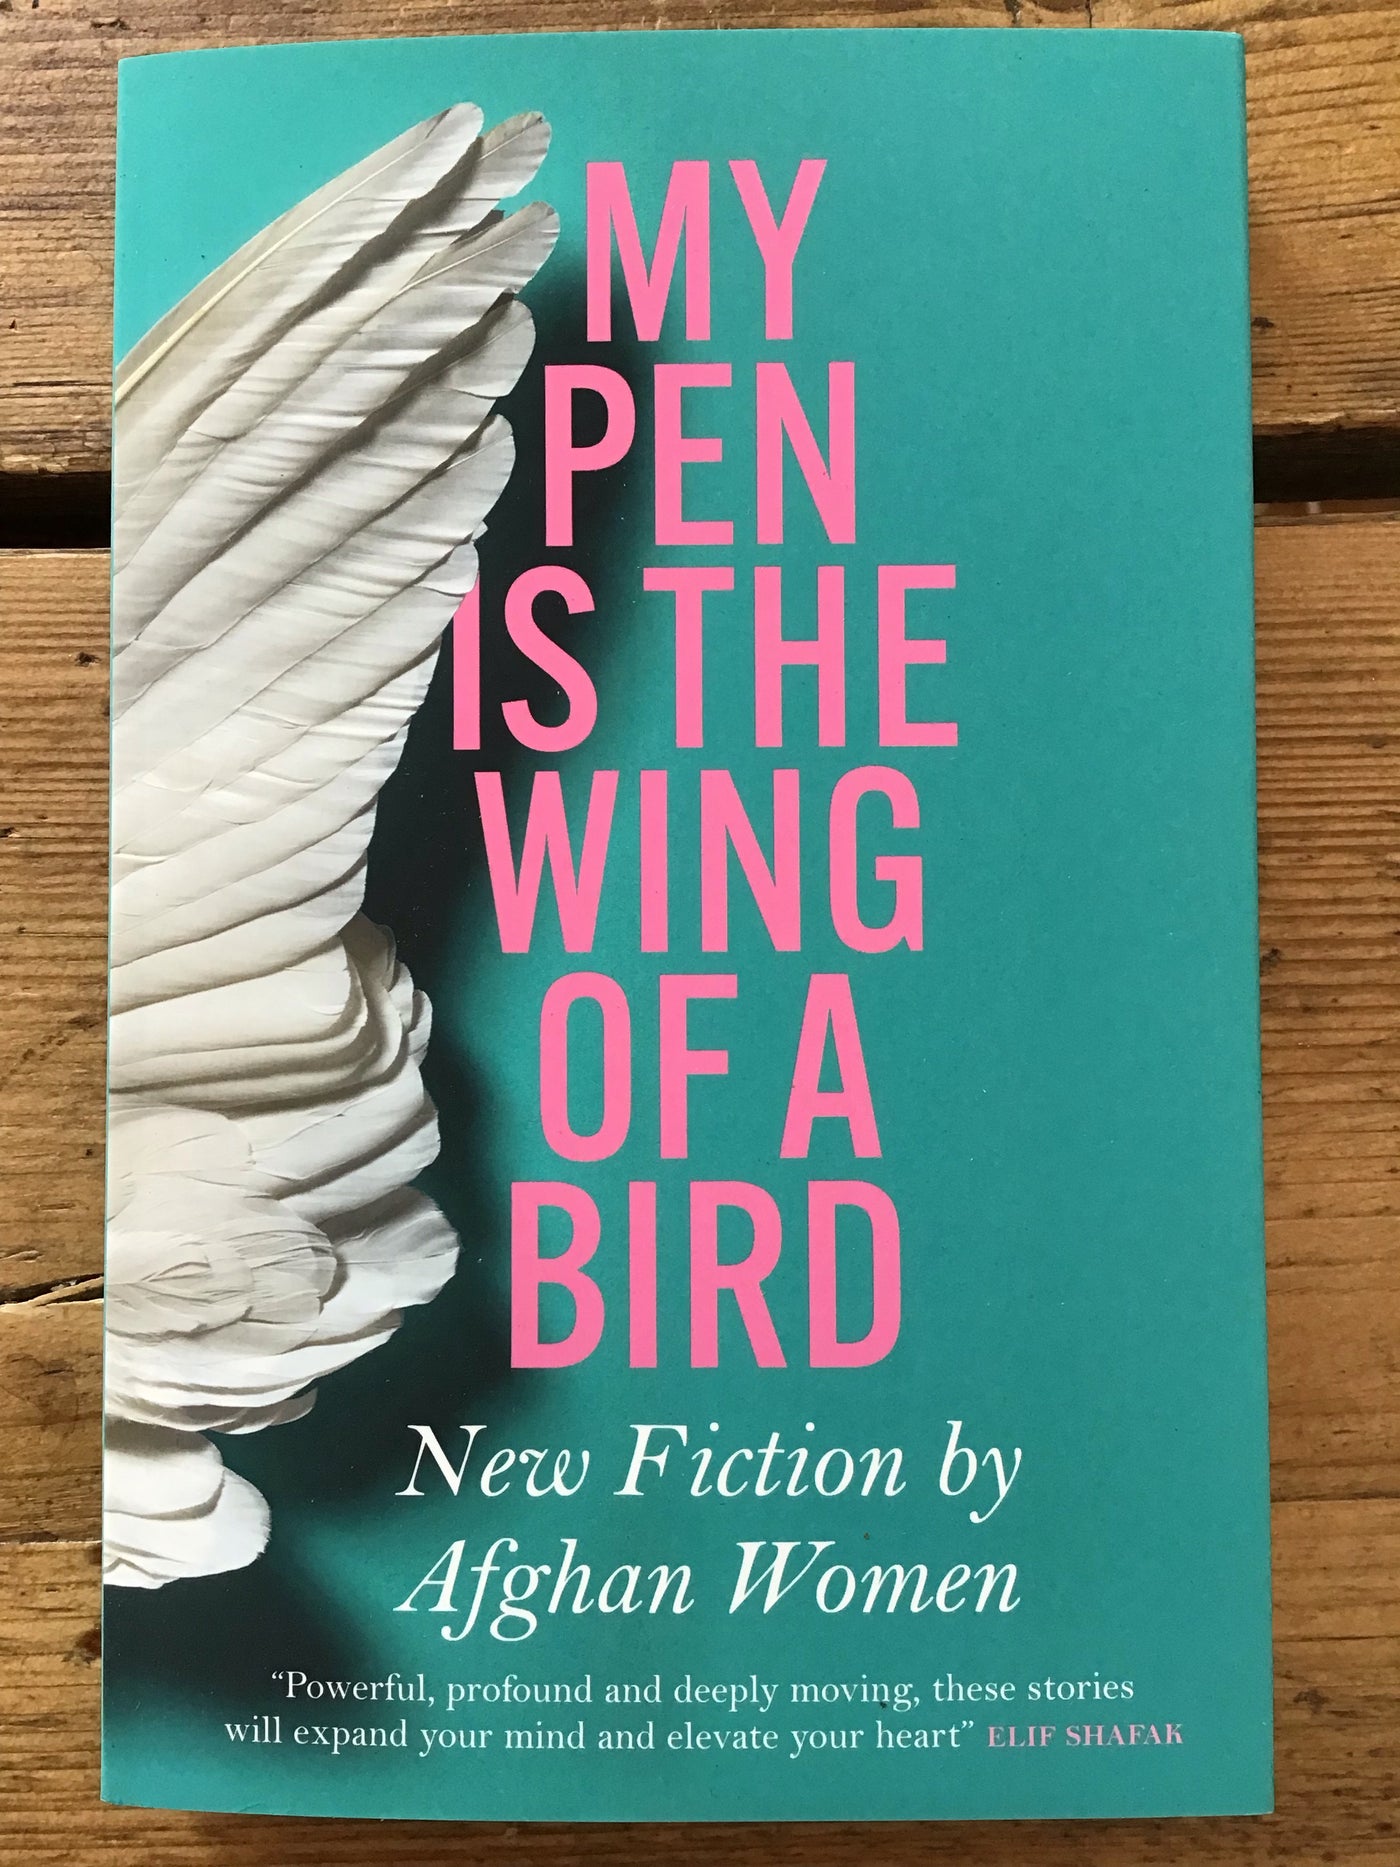 My Pen is the Wing of a Bird